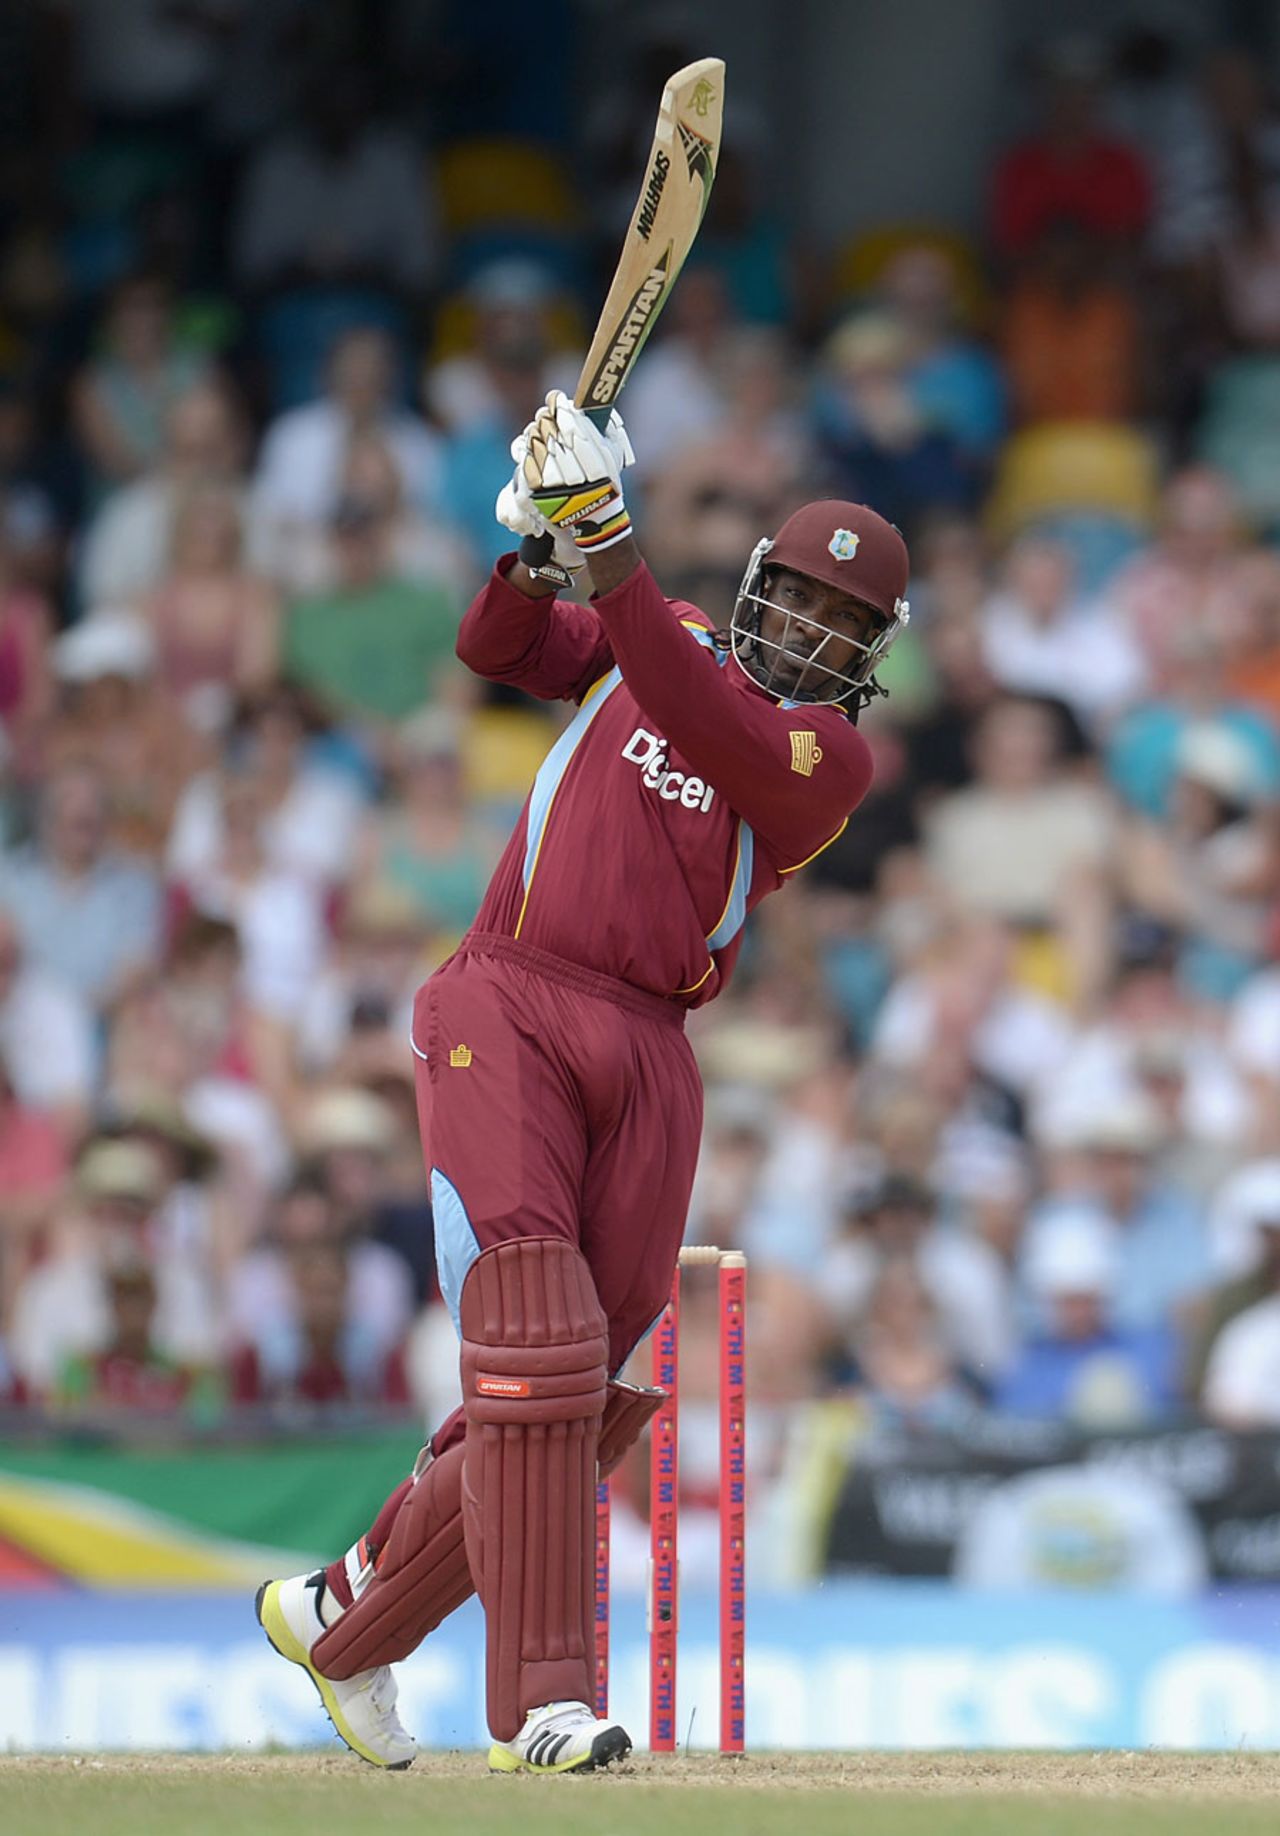 After a few sighters, Chris Gayle started to find his timing, West Indies v England, 1st T20, Barbados, March 9, 2014